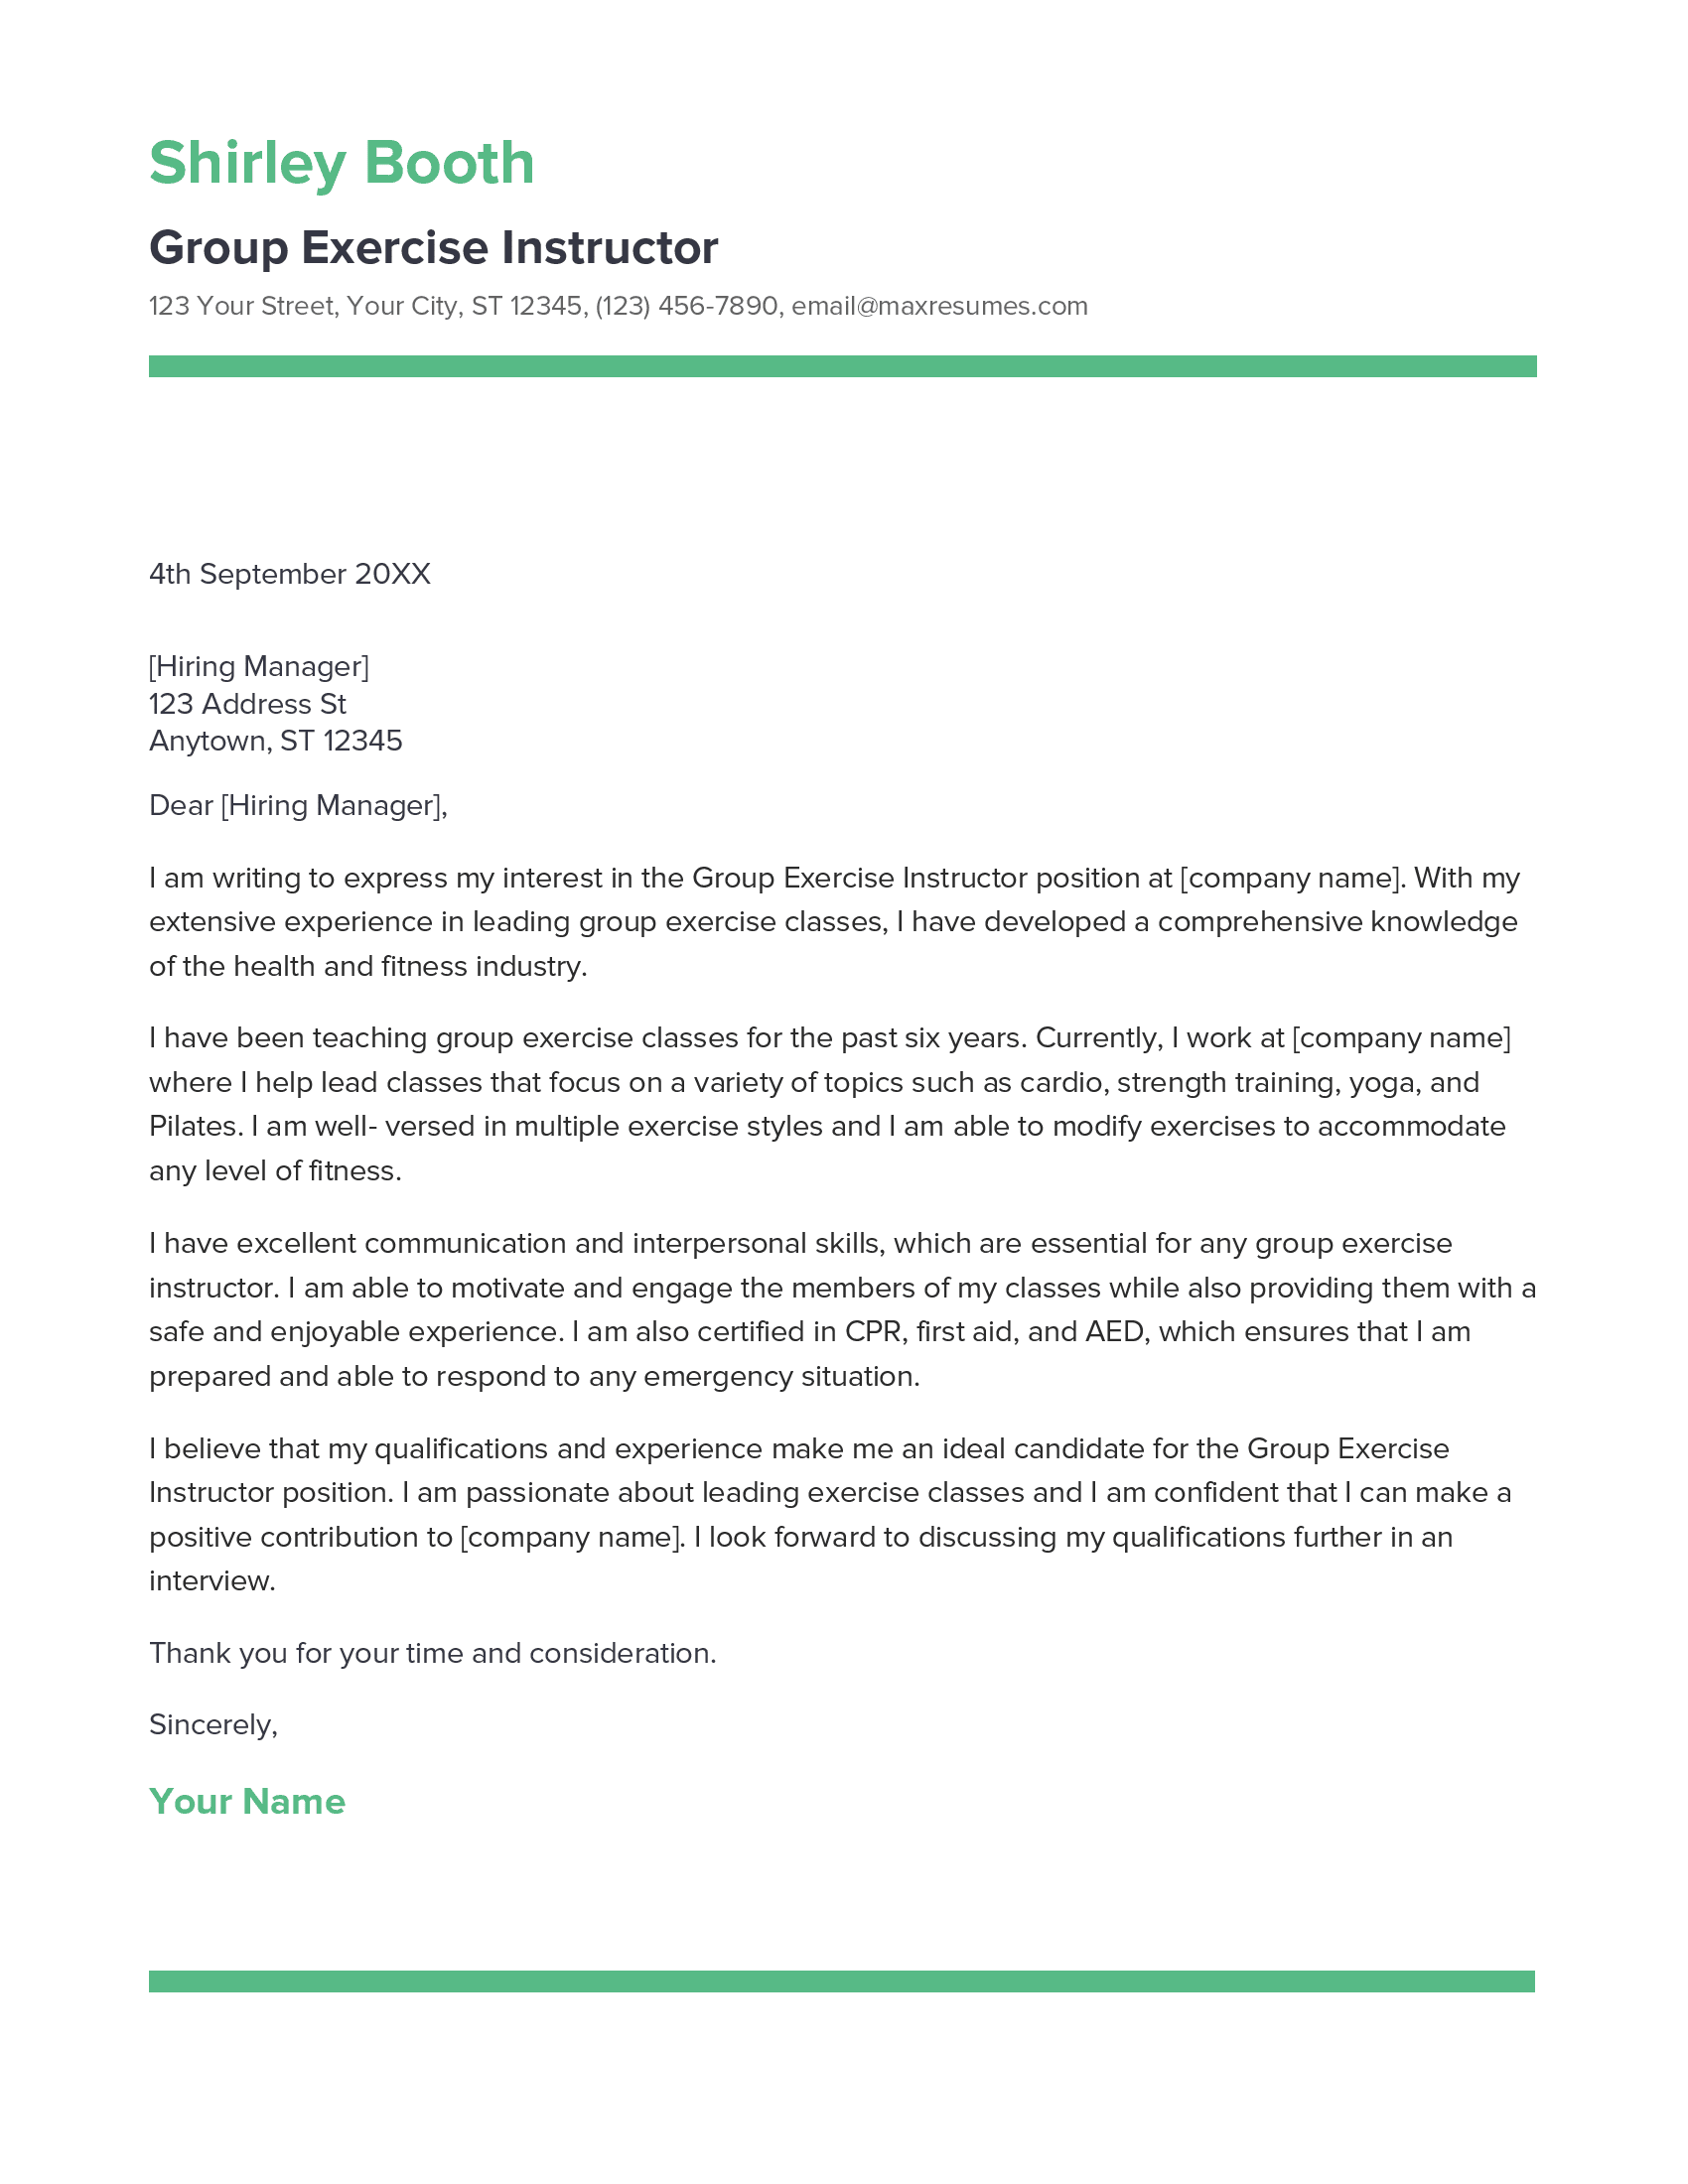 Group Exercise Instructor Cover Letter Example